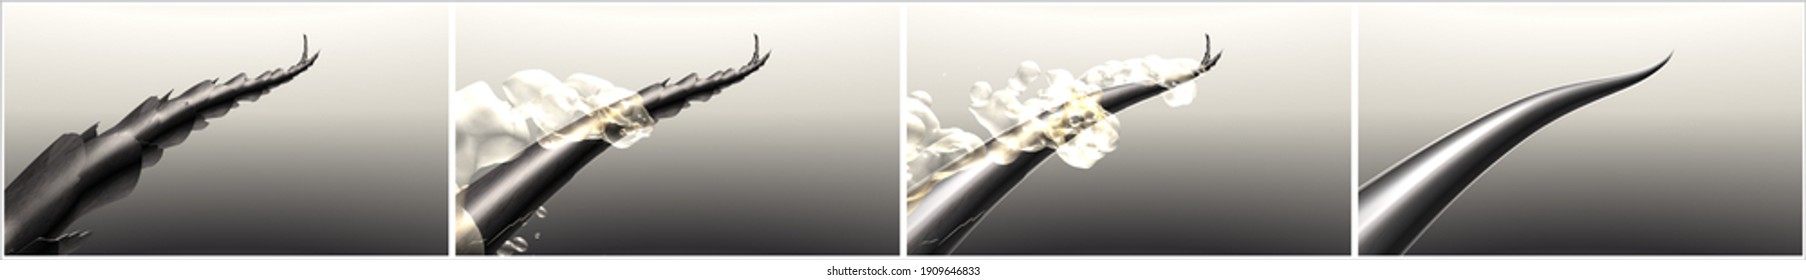 Hair repair technology. 3d illustration showing the action of shampoo or hair smoothing products. Comparison of the damaged hair structure with split ends before and strong, smooth, shining hair after